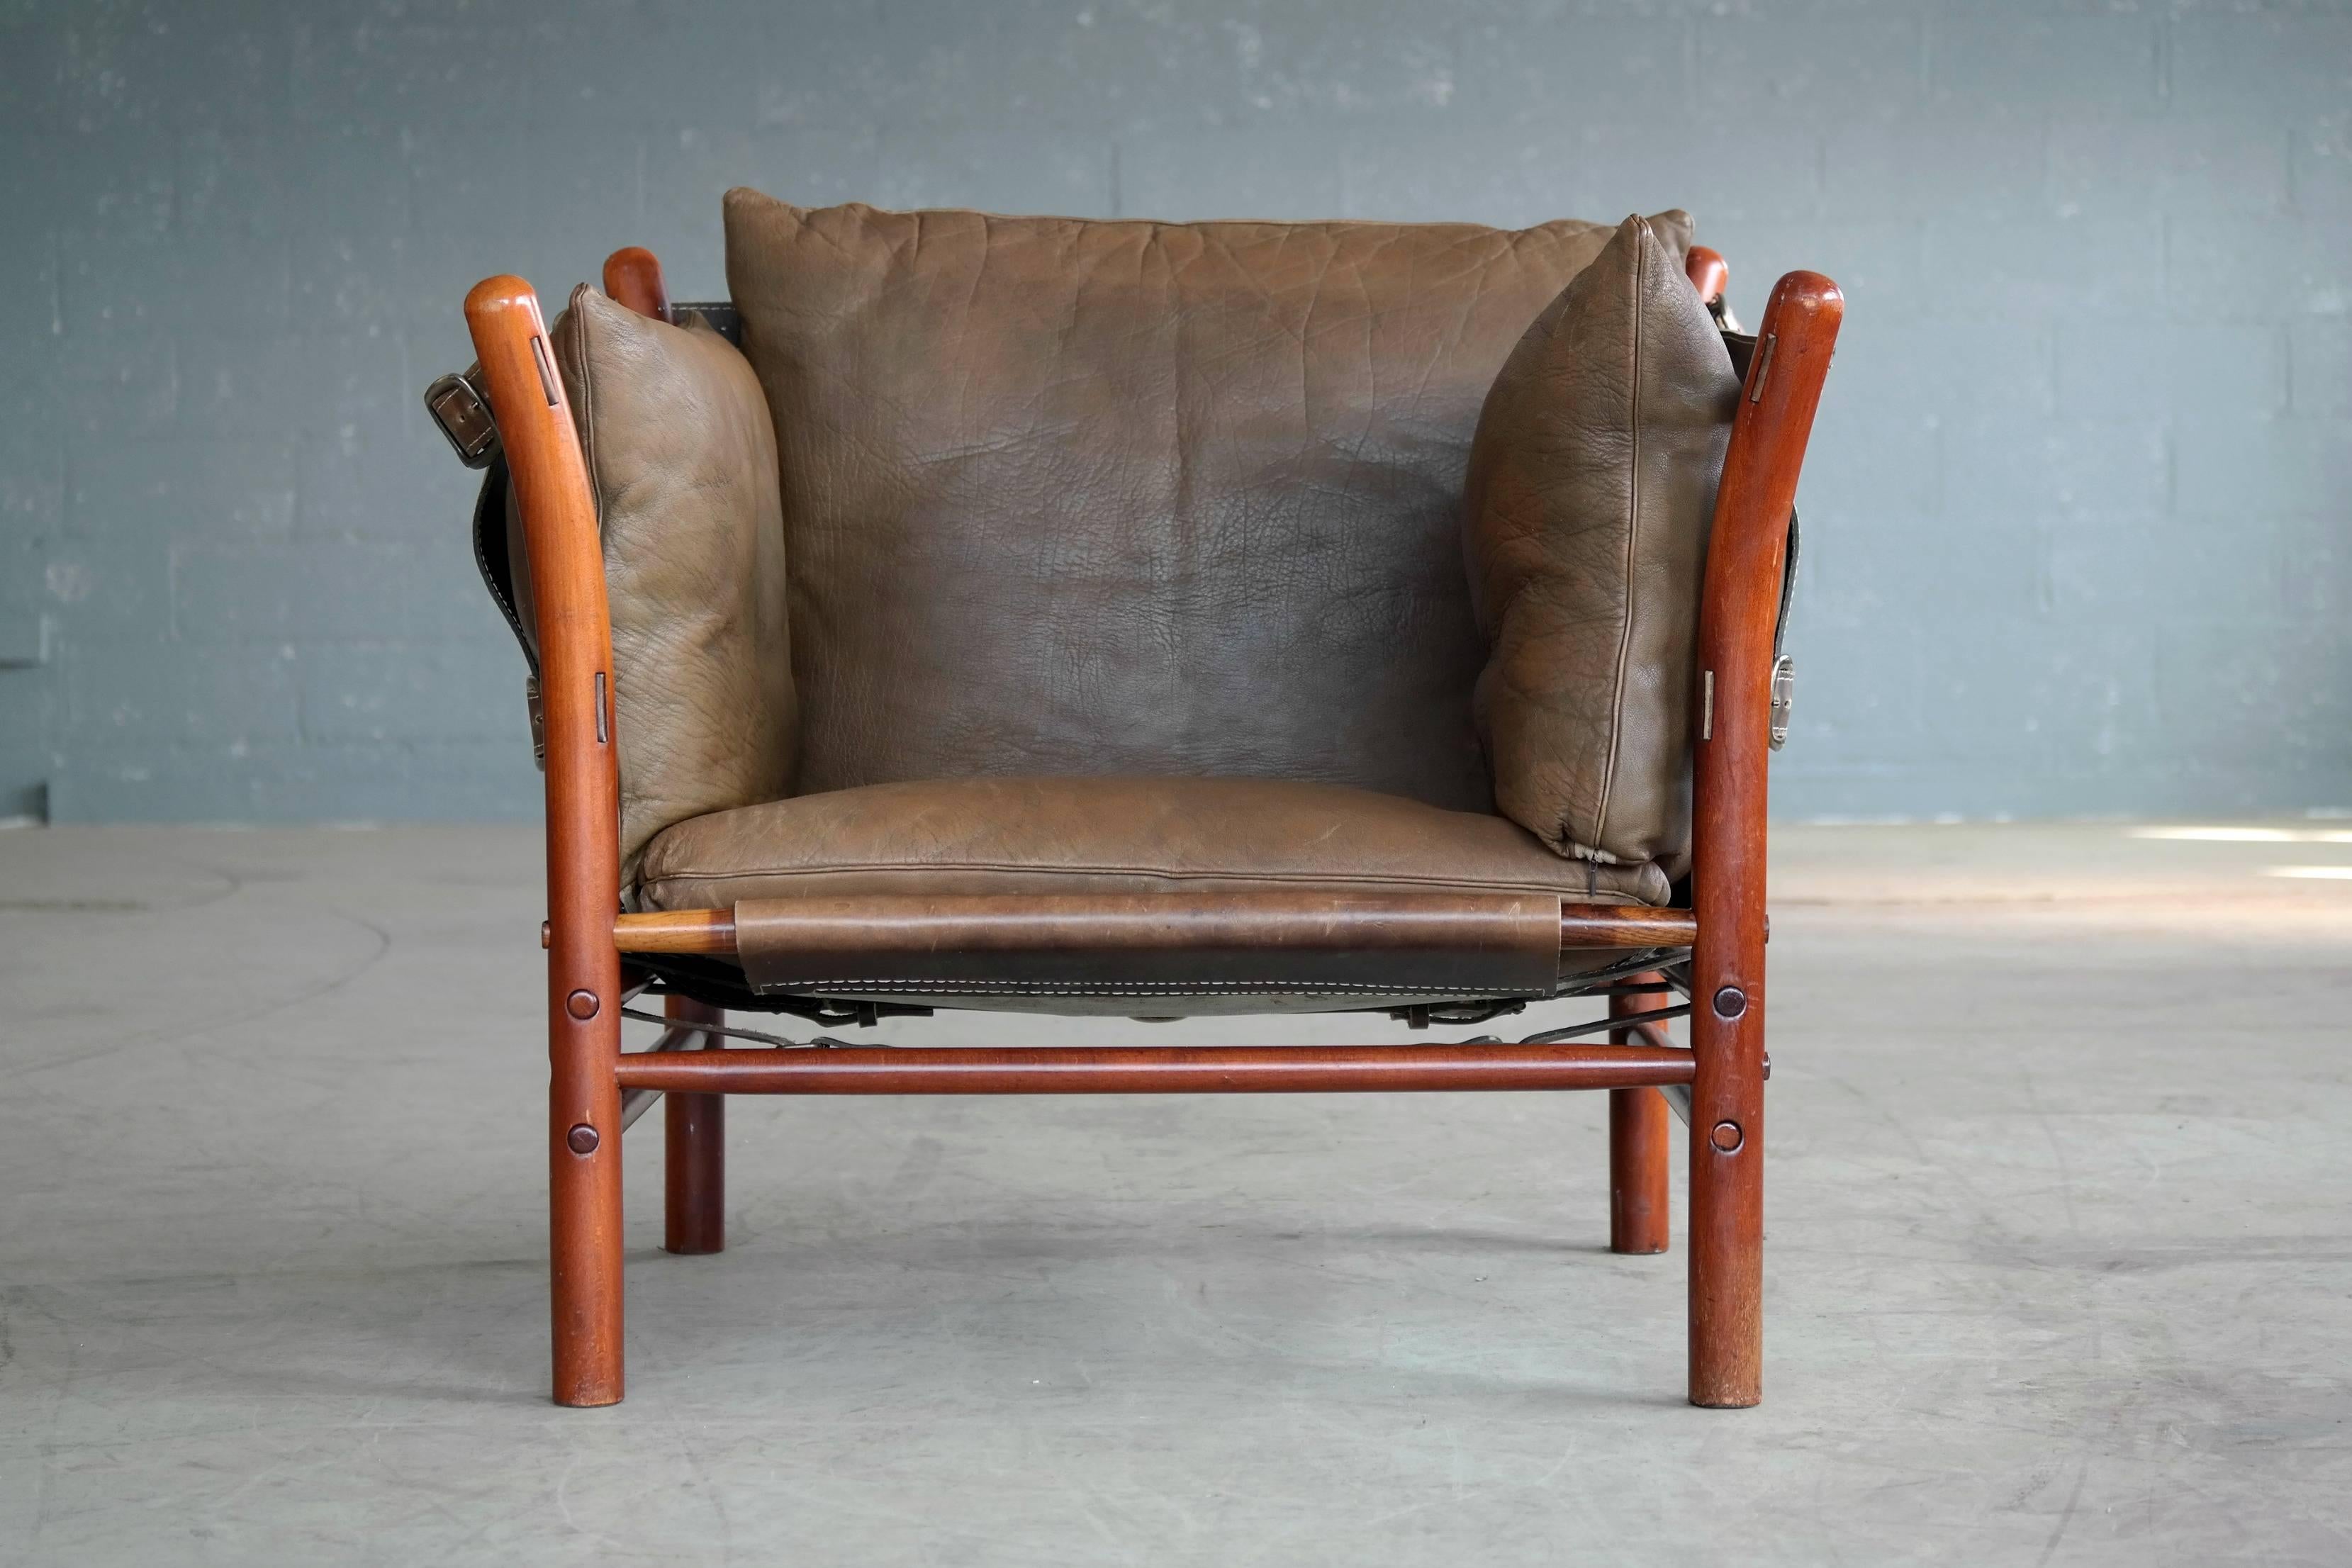 Beautiful 1960s safari chair in brown and olive colored leather and stained beechwood designed by Arne Norell in the 1960s for Norell Mobler, Sweden. The chair is assembled without any screws or hardware and held together by the heavy gauge saddle